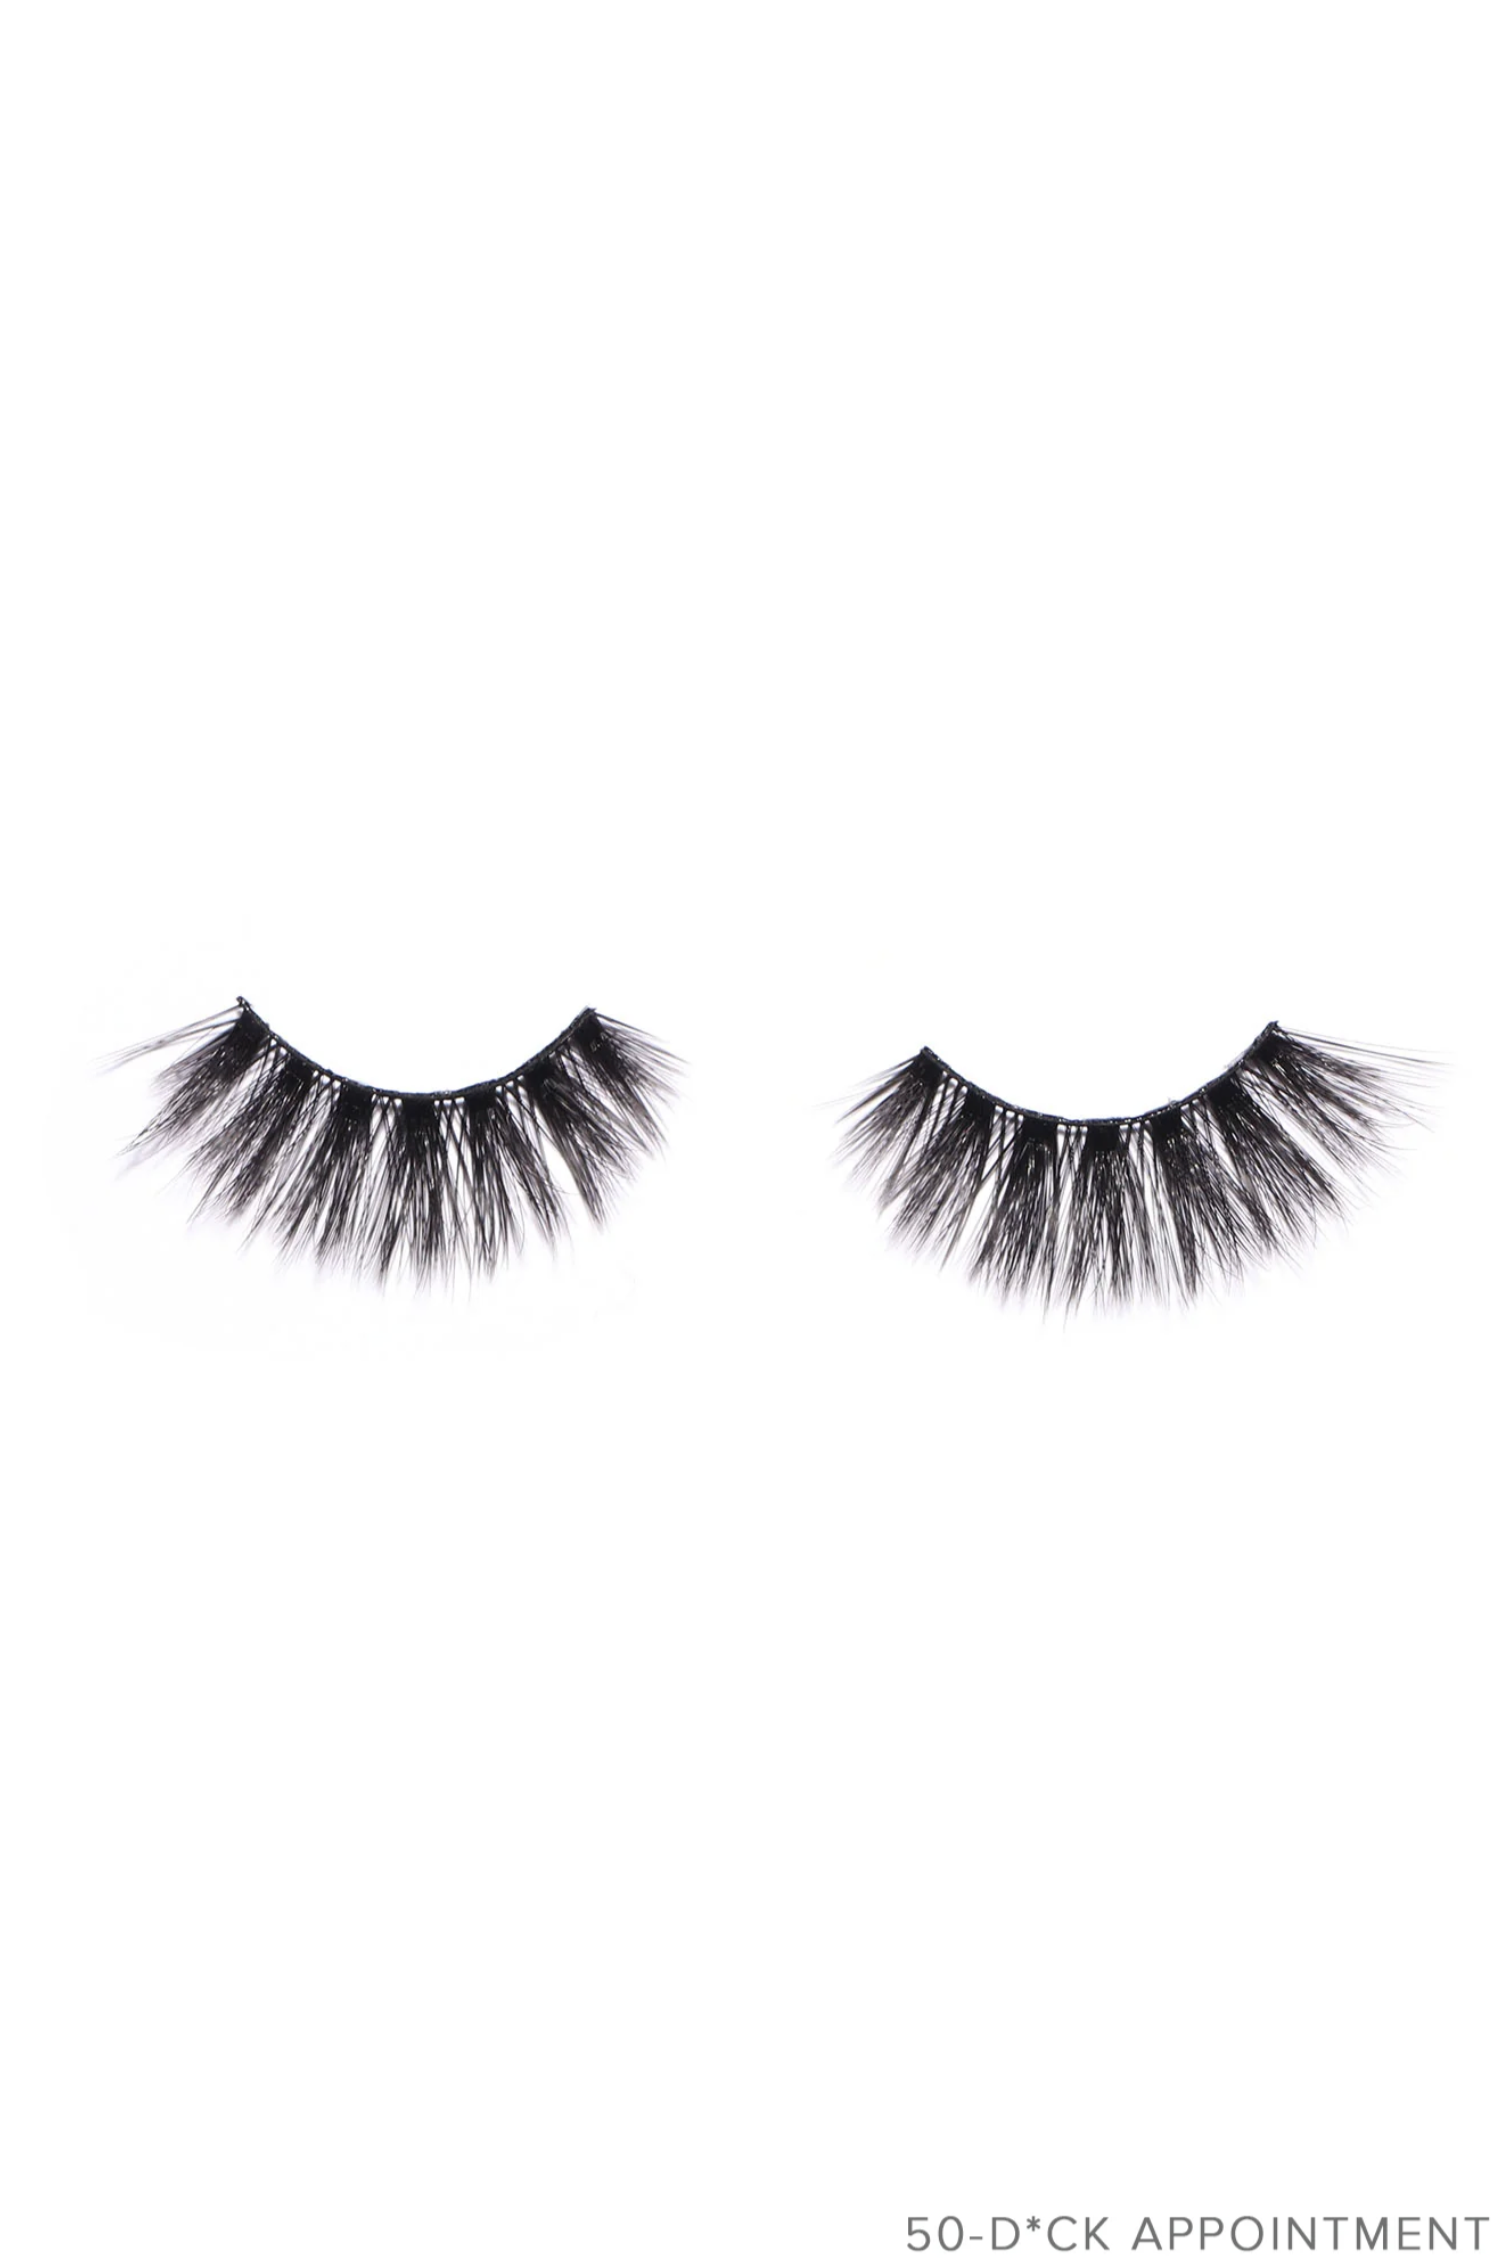 Main Character Luxe Faux Lashes - D*ck Appointment